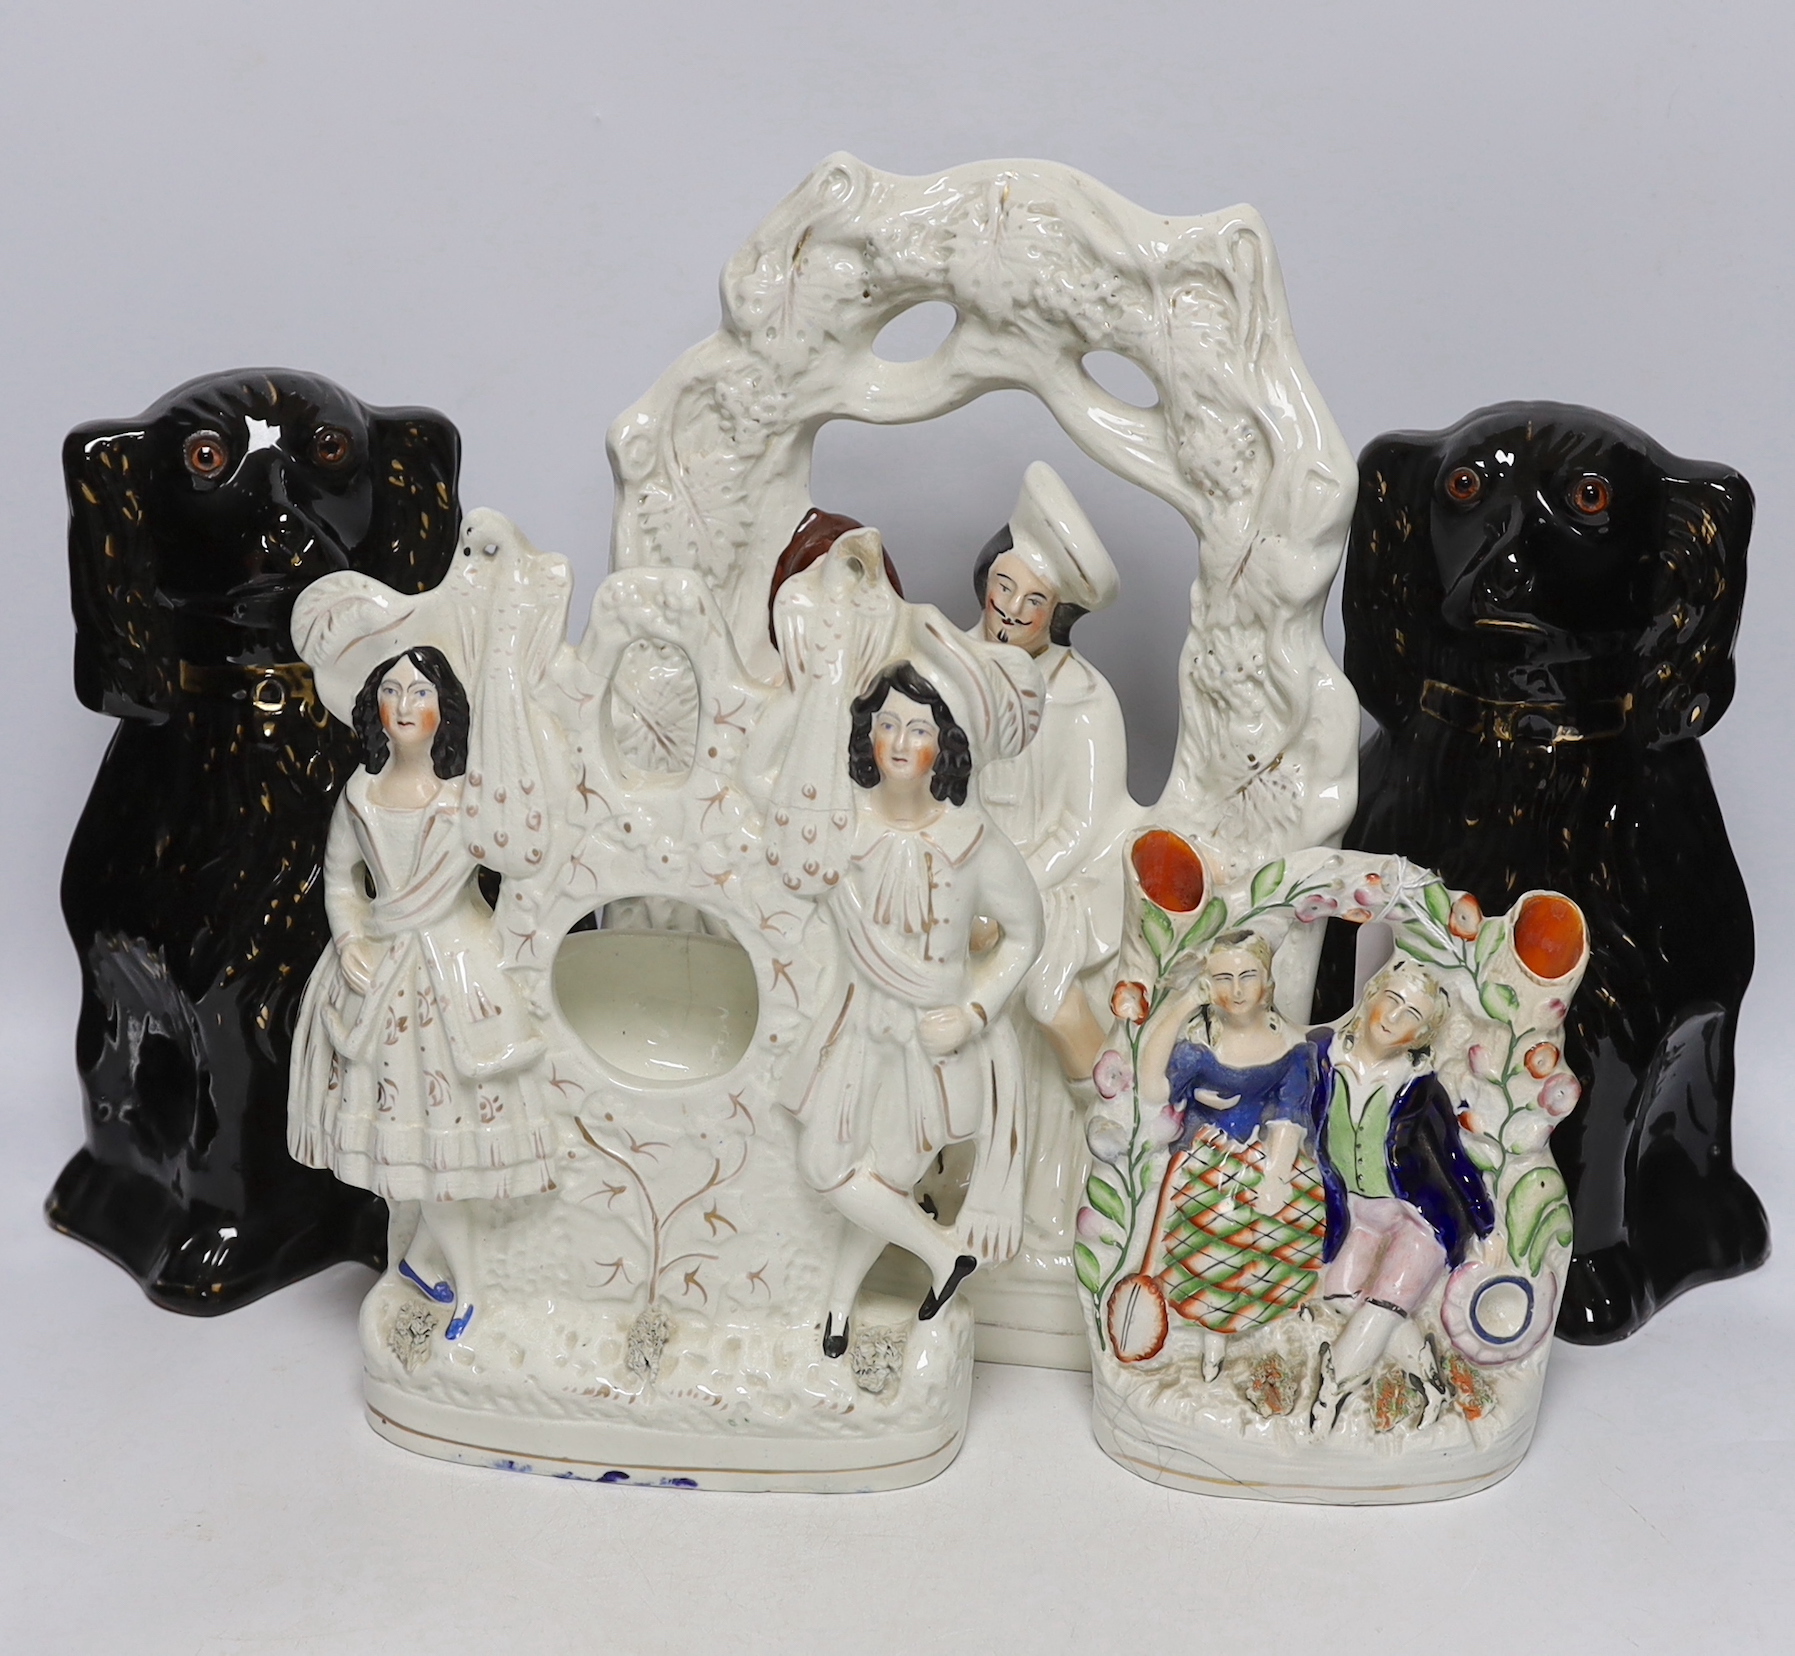 A Staffordshire watch-stand figural group, pair of comforters and two others, largest 34cm high